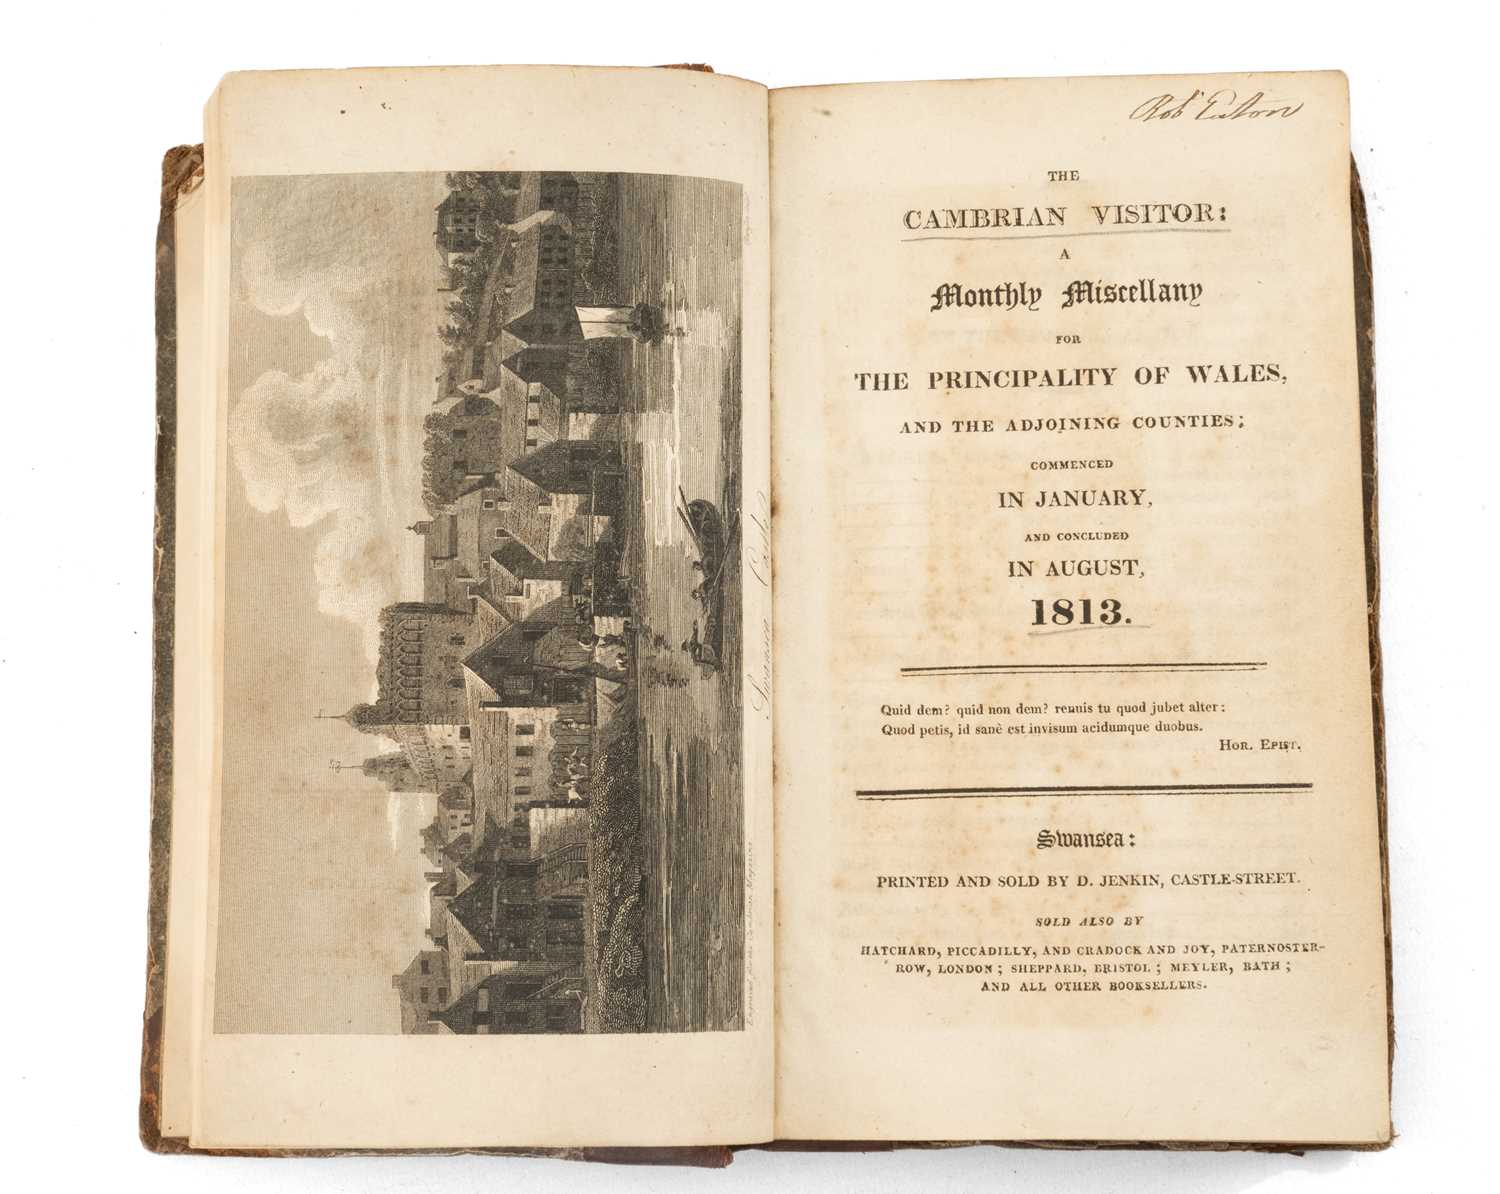 THE CAMBRIAN VISITOR WITH ENTRY BY WILLIAM WESTON YOUNG being 'A Monthly Miscellany for The